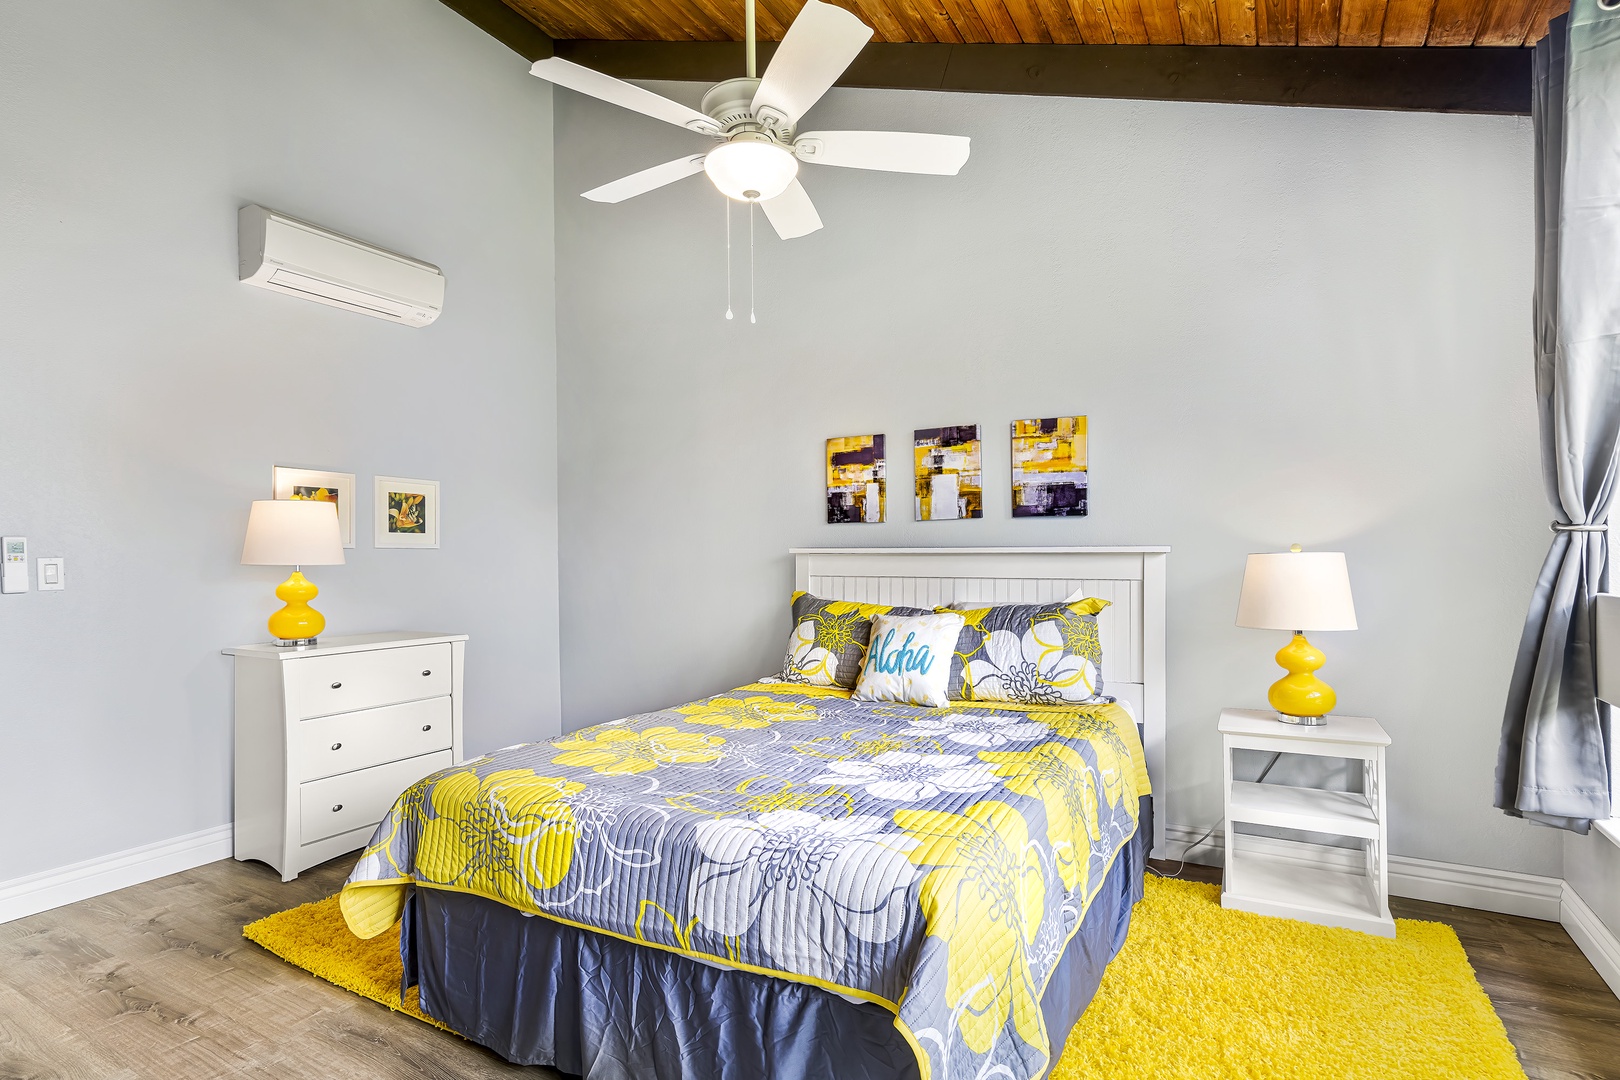 Kailua Kona Vacation Rentals, Keauhou Kona Surf & Racquet 9303 - The bedroom is a reminder of the state flower, the Yellow Hibiscus